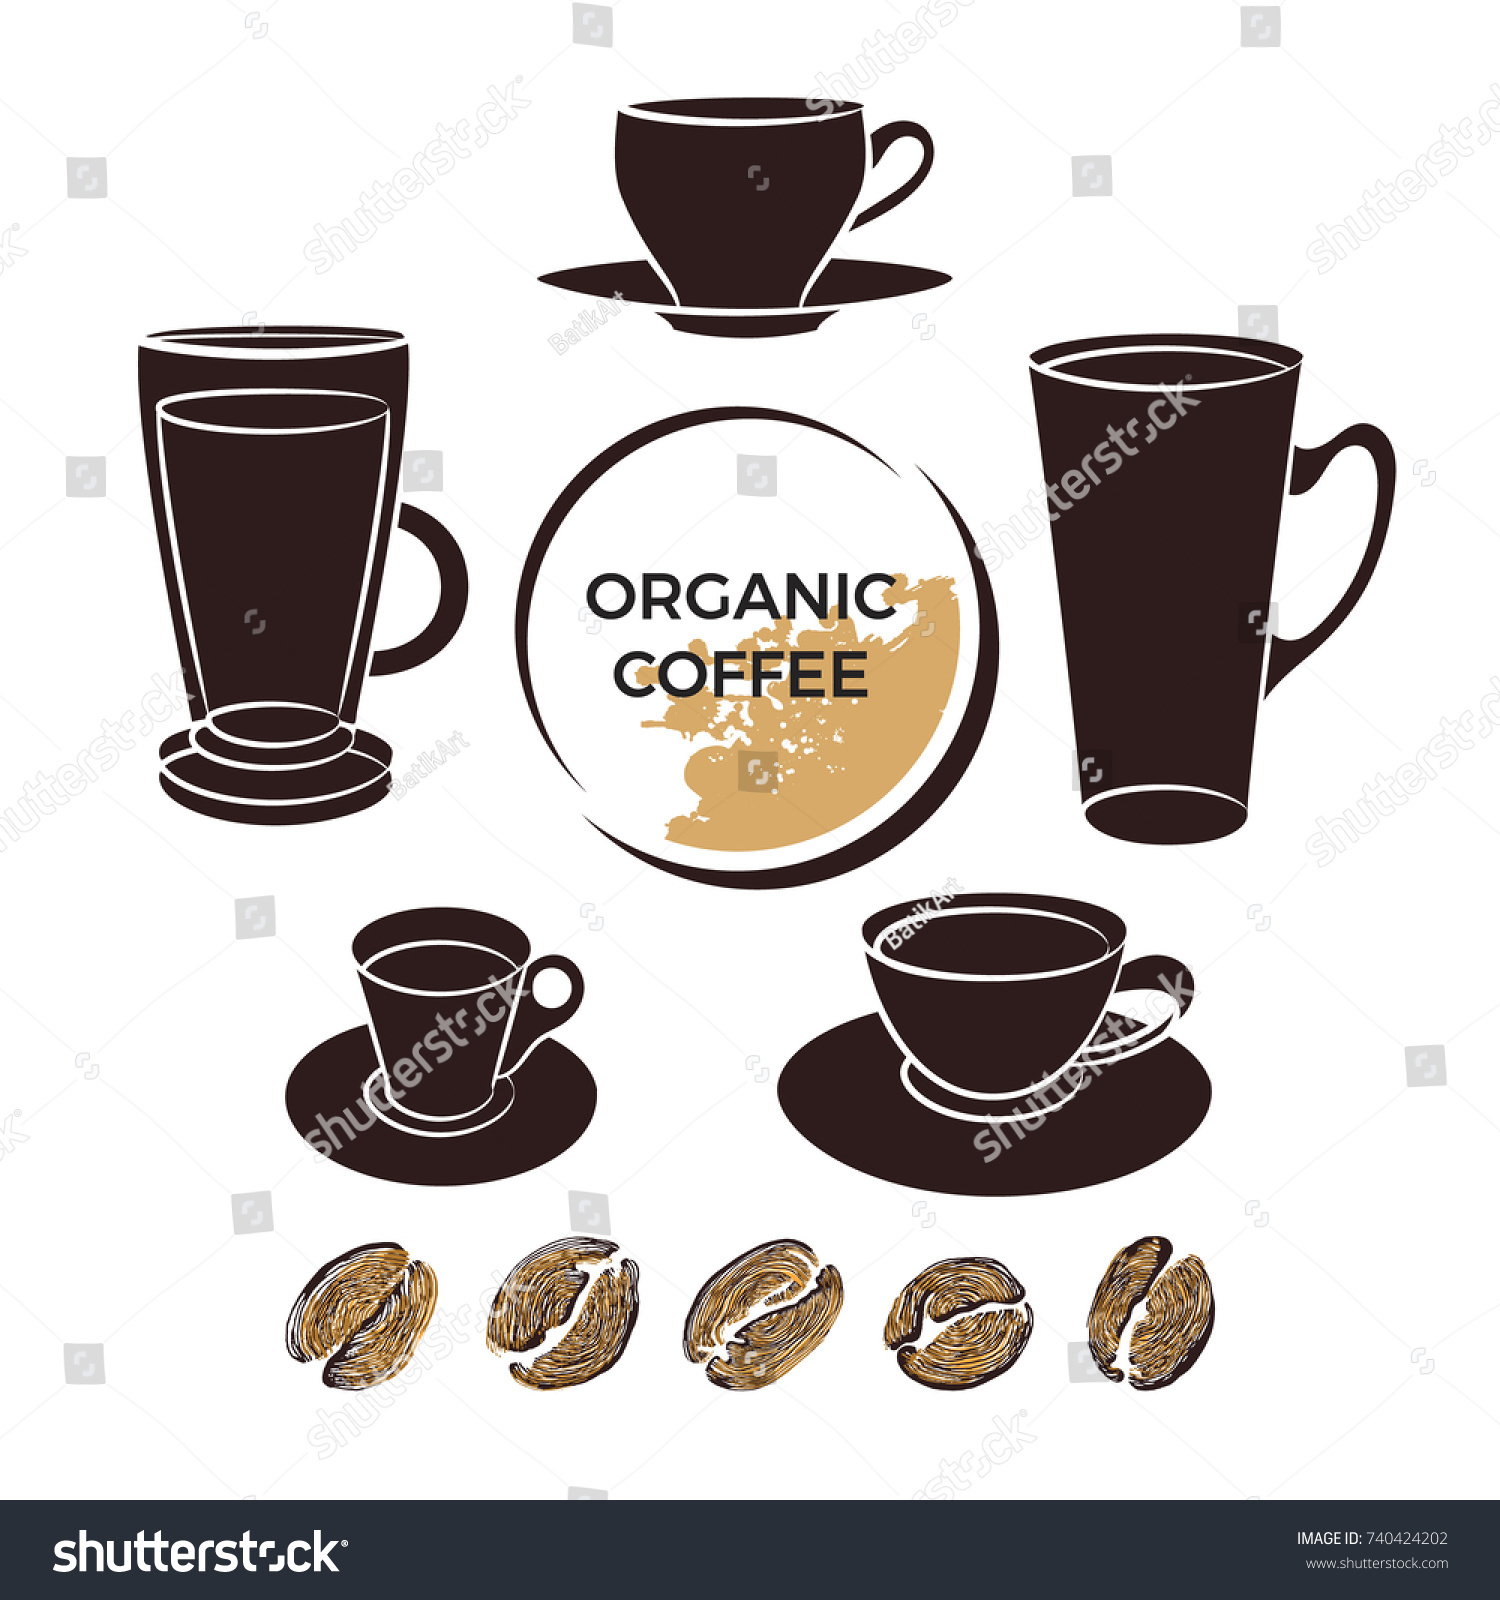 Set Coffee Cups Realistic Beans Silhouette Stock Photo (Photo ...